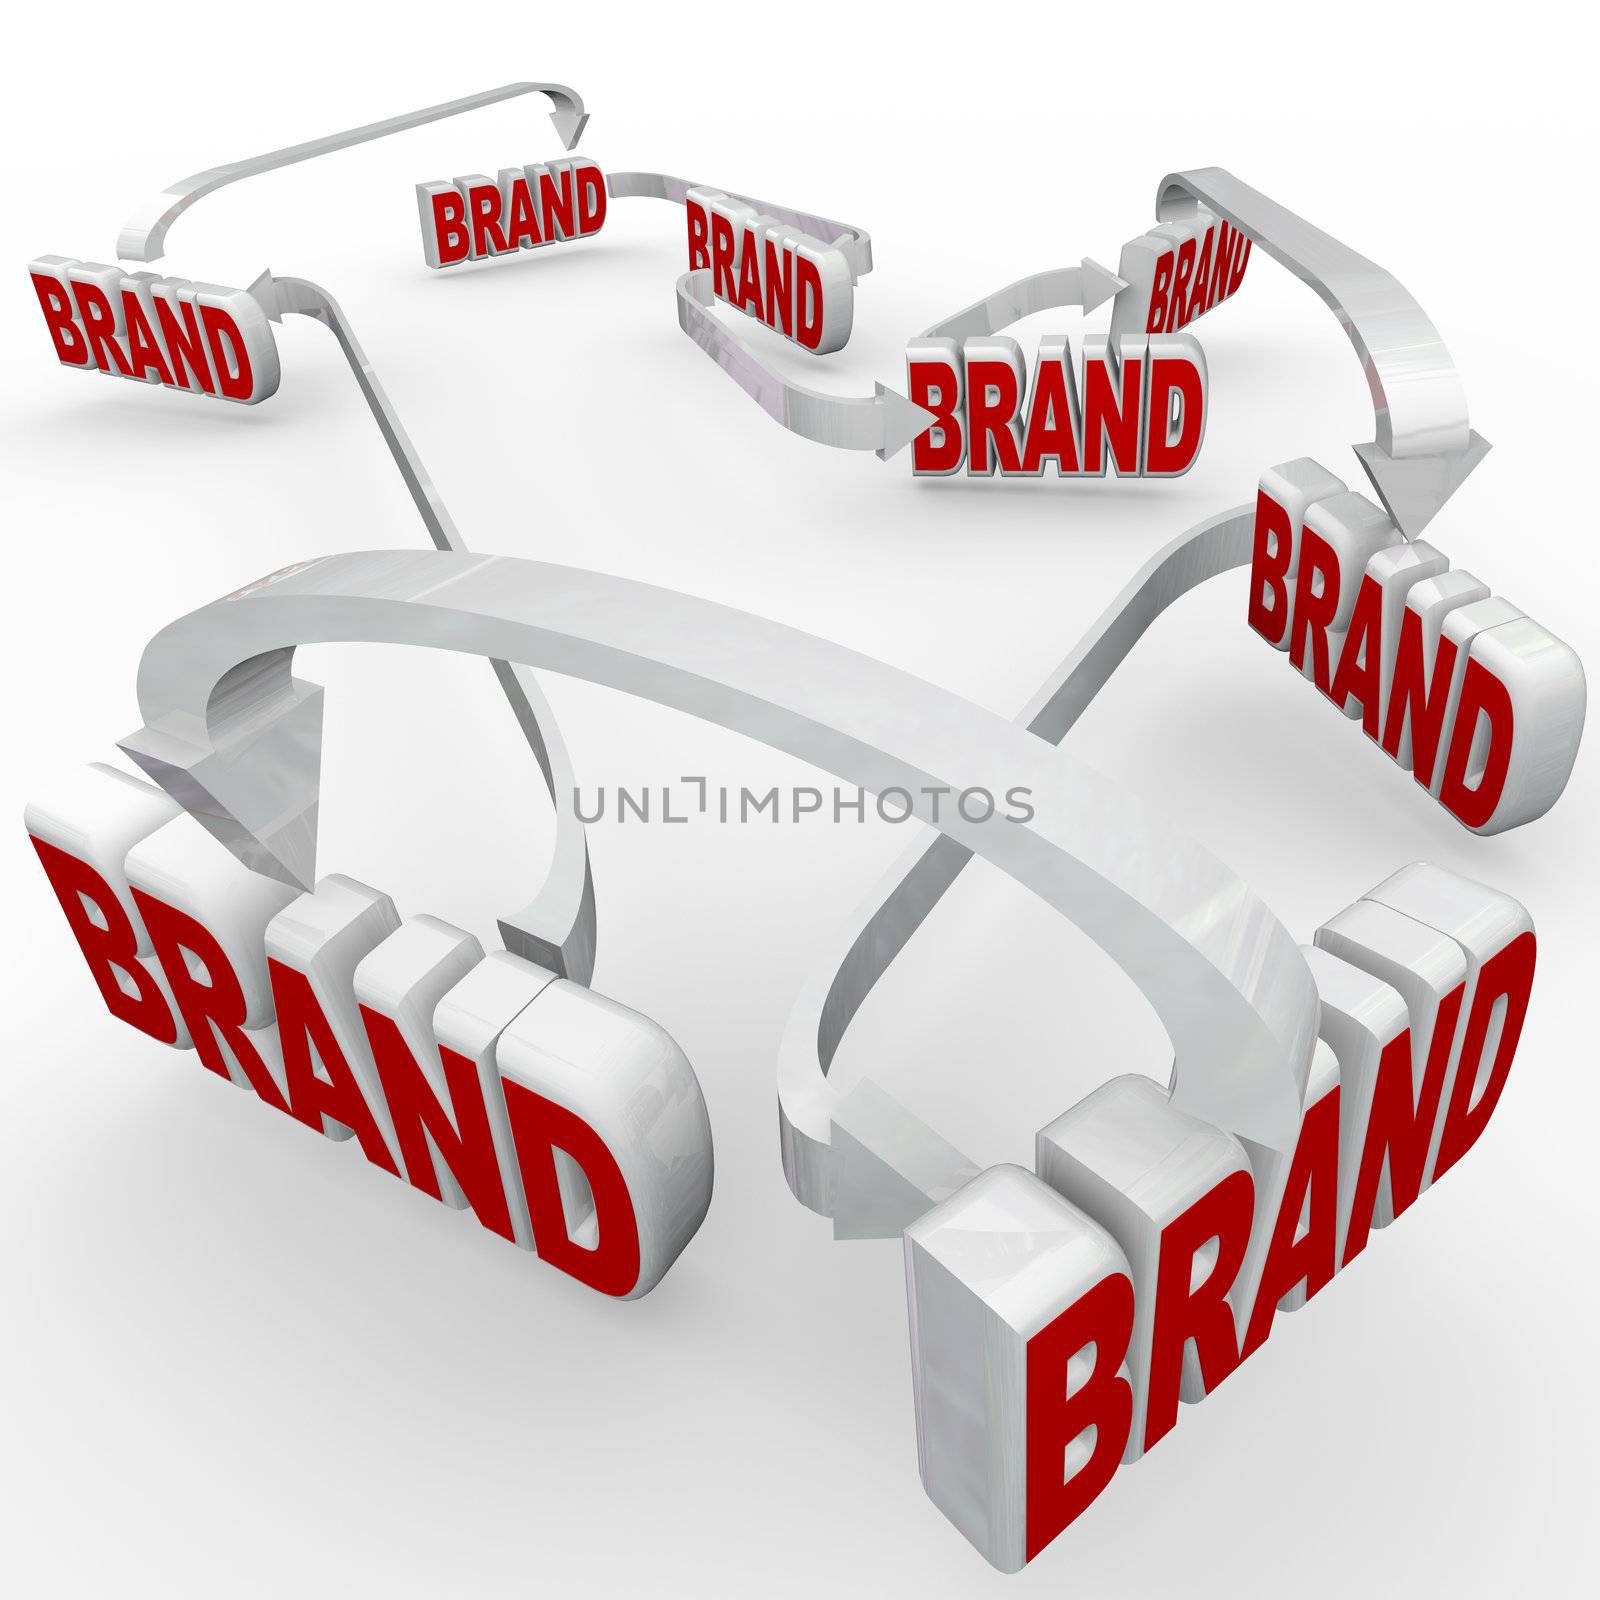 The word brand repeated many times and reinforced by many repeated usages of marketing and advertising, strengthening awareness, loyalty and identity